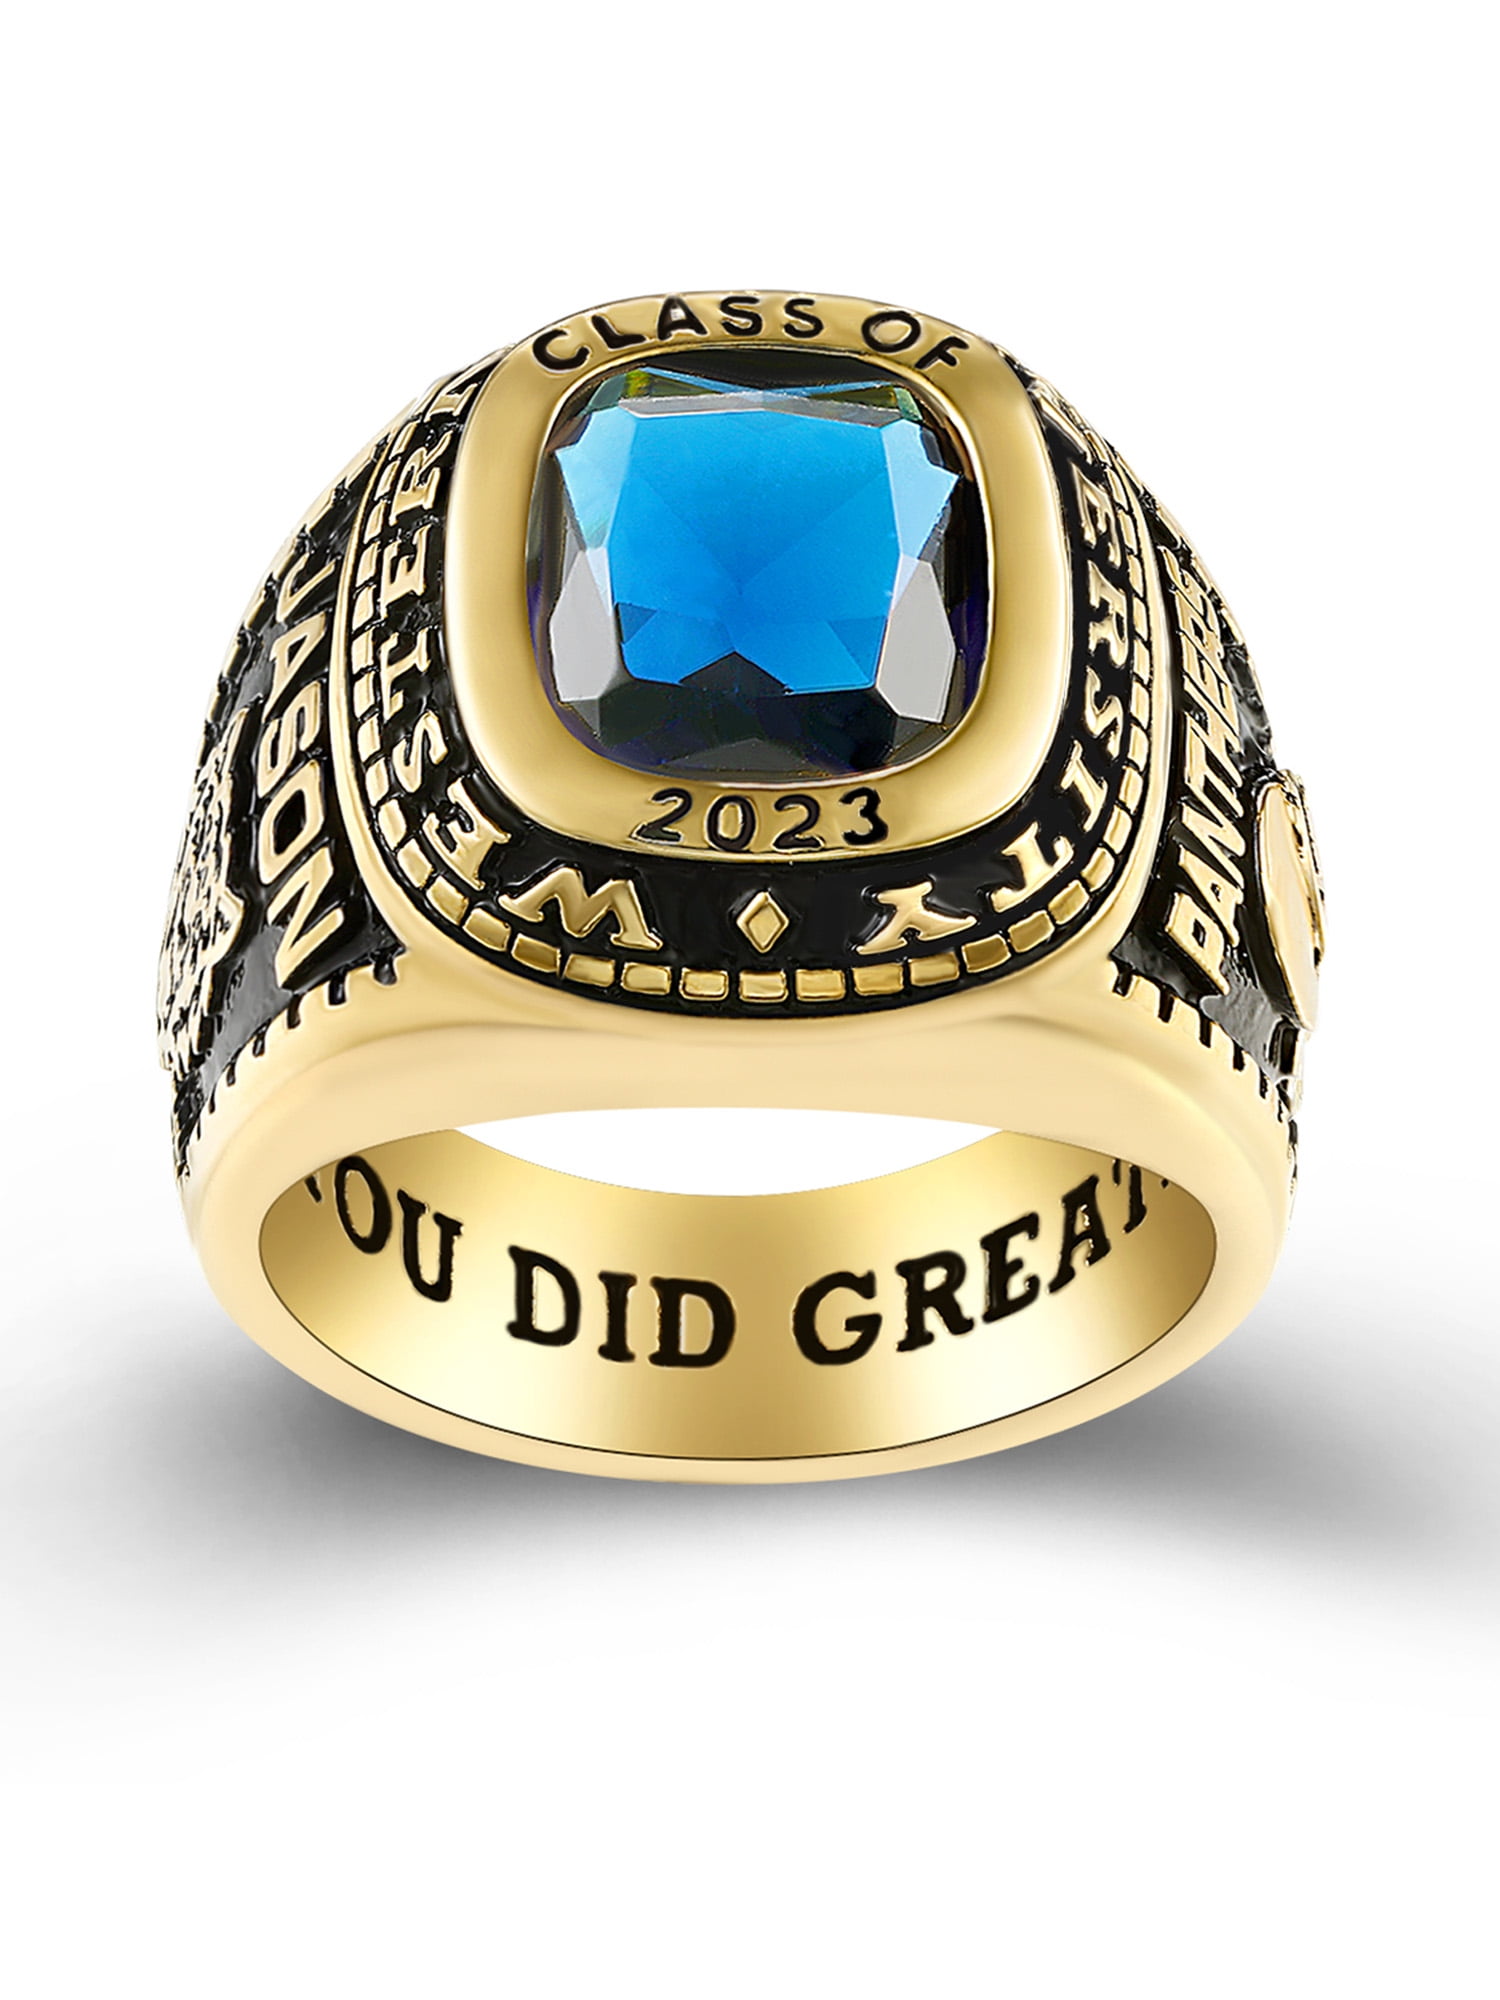 Solo Customizable Unisex Class Band™ by Jostens | Class rings high school,  Rings for men, Rings